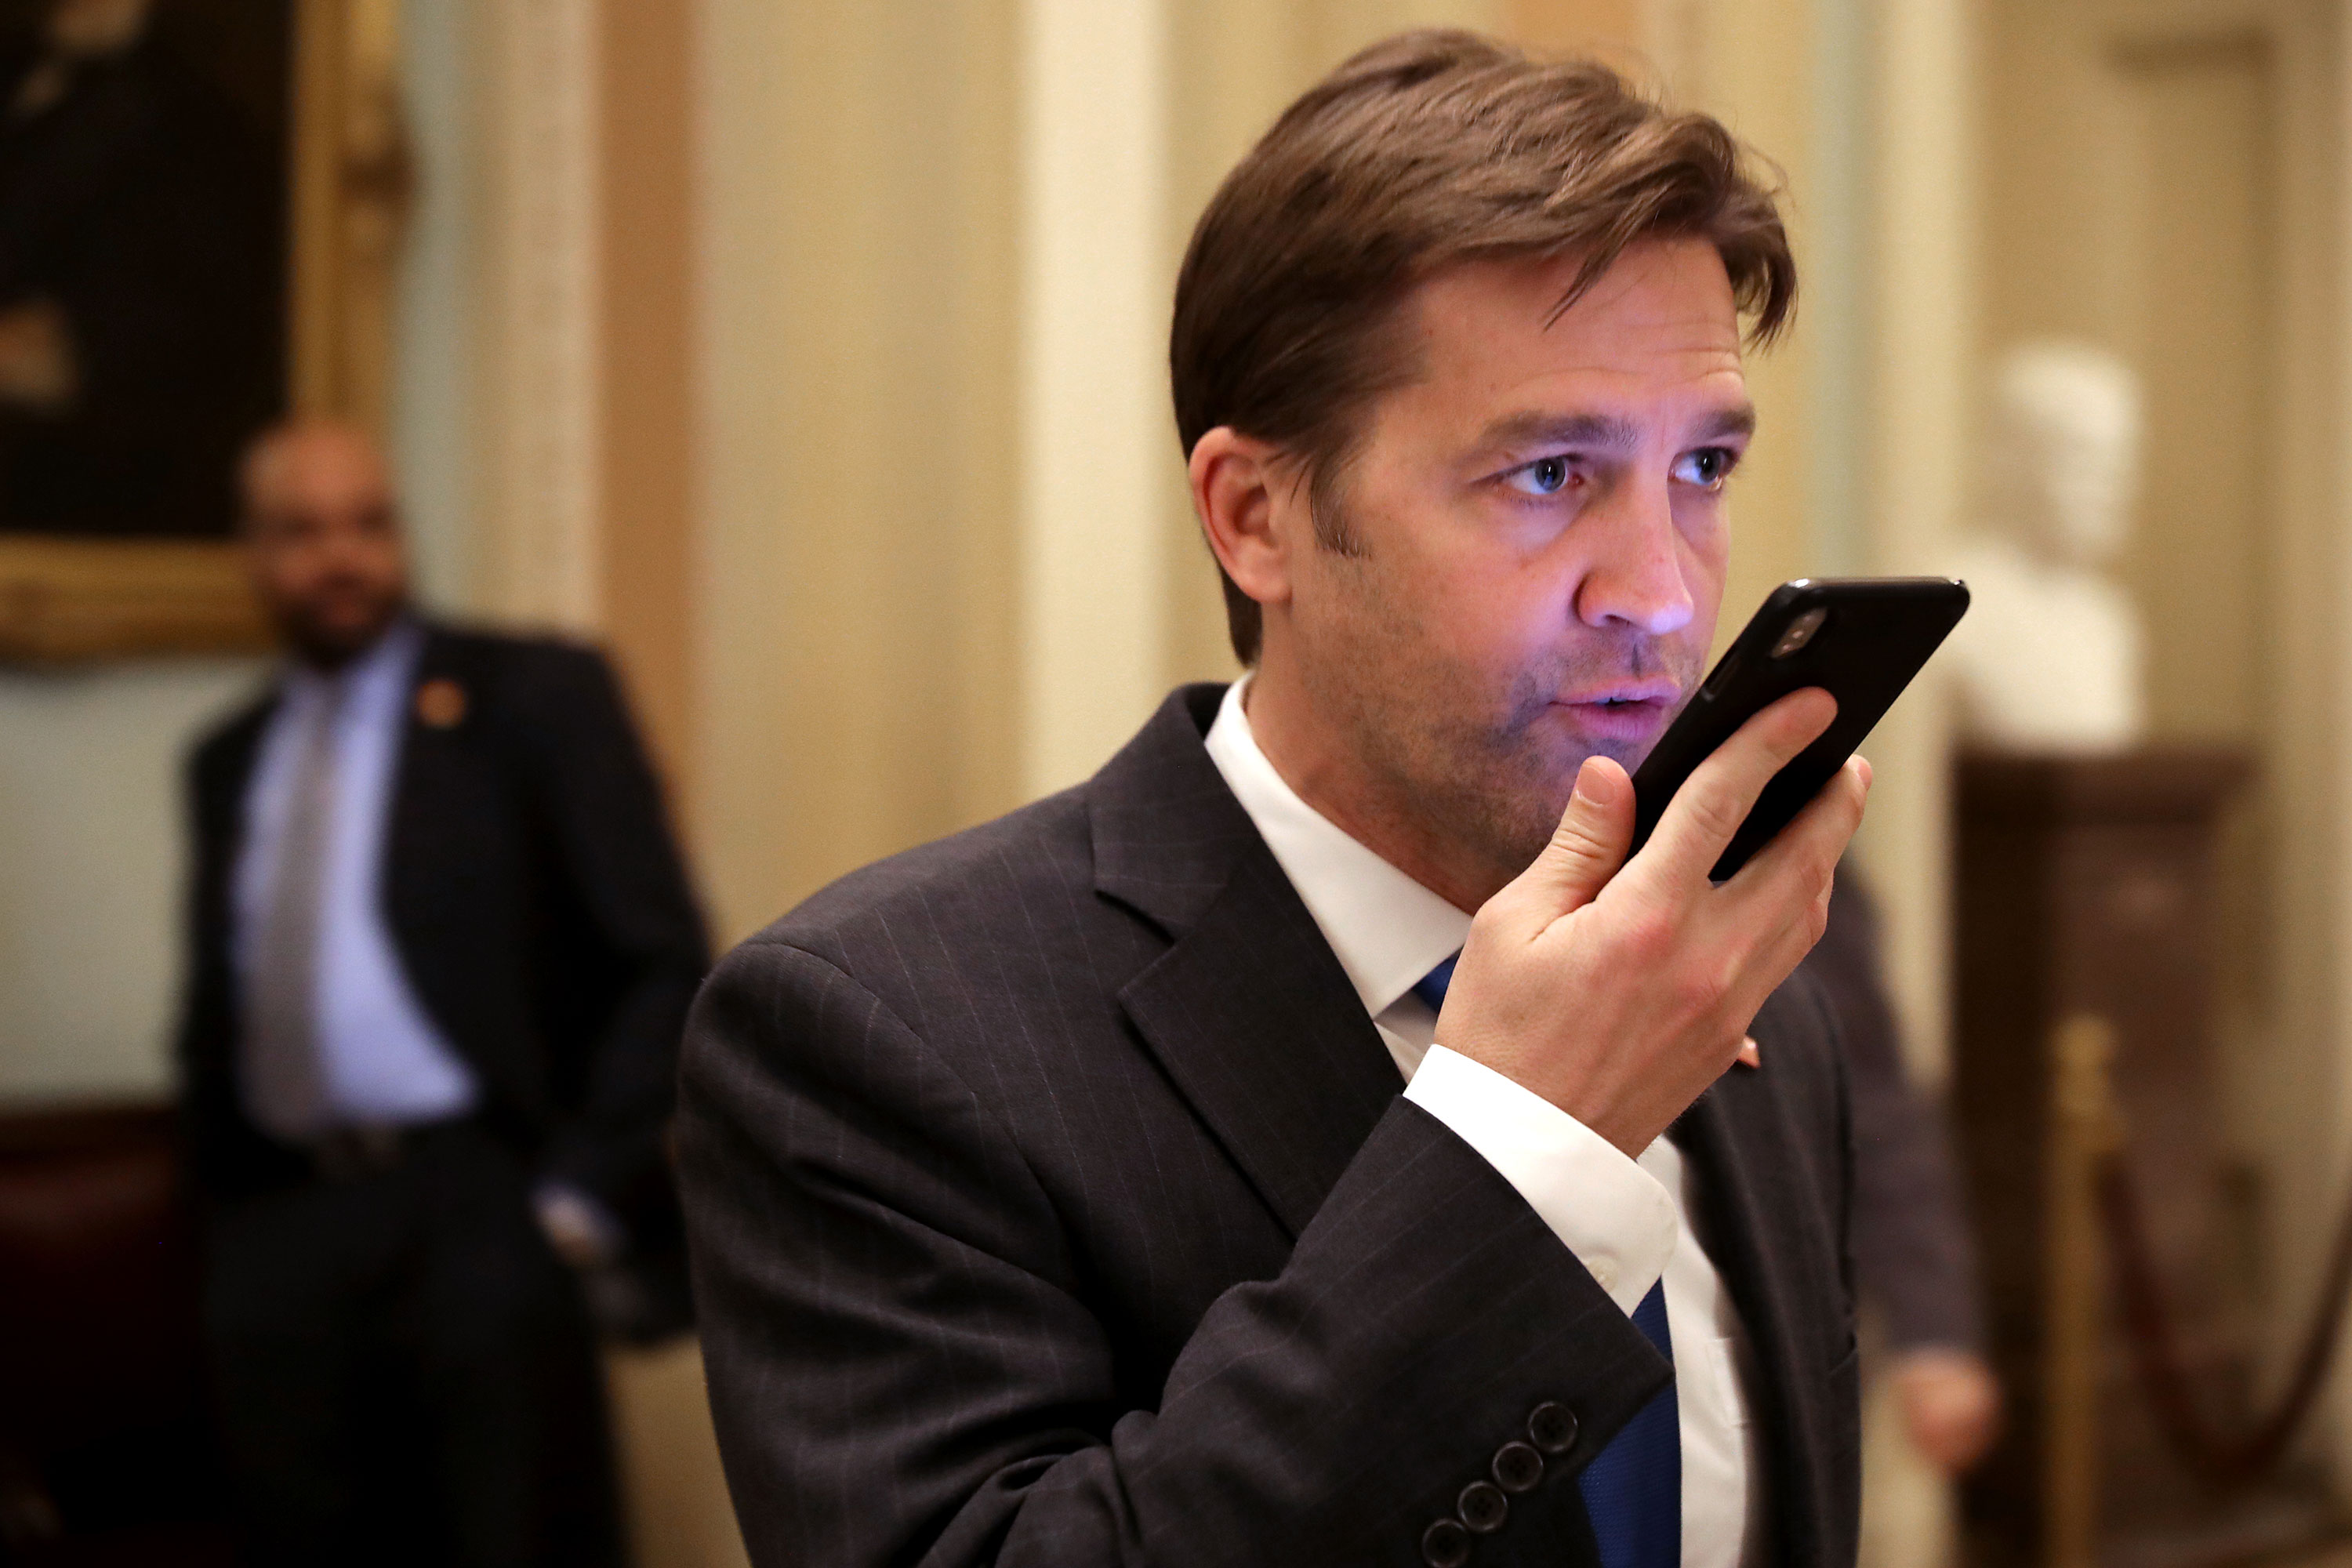 Ben Sasse heads into a Republican caucus lunch meeting at the U.S. Capitol December 21, 2018 in Washington, DC. The U.S. Senate will meet Friday to consider a budget bill passed Thursday by the House of Representatives that would fund the federal government and includes more than $500 million for a wall along the U.S.-Mexico border. The Senate is unlikely to pass the bill with the wall funding, moving the government closer to a partial shut down just days before the Christmas holiday. (Chip Somodevilla&mdash;Getty Images)